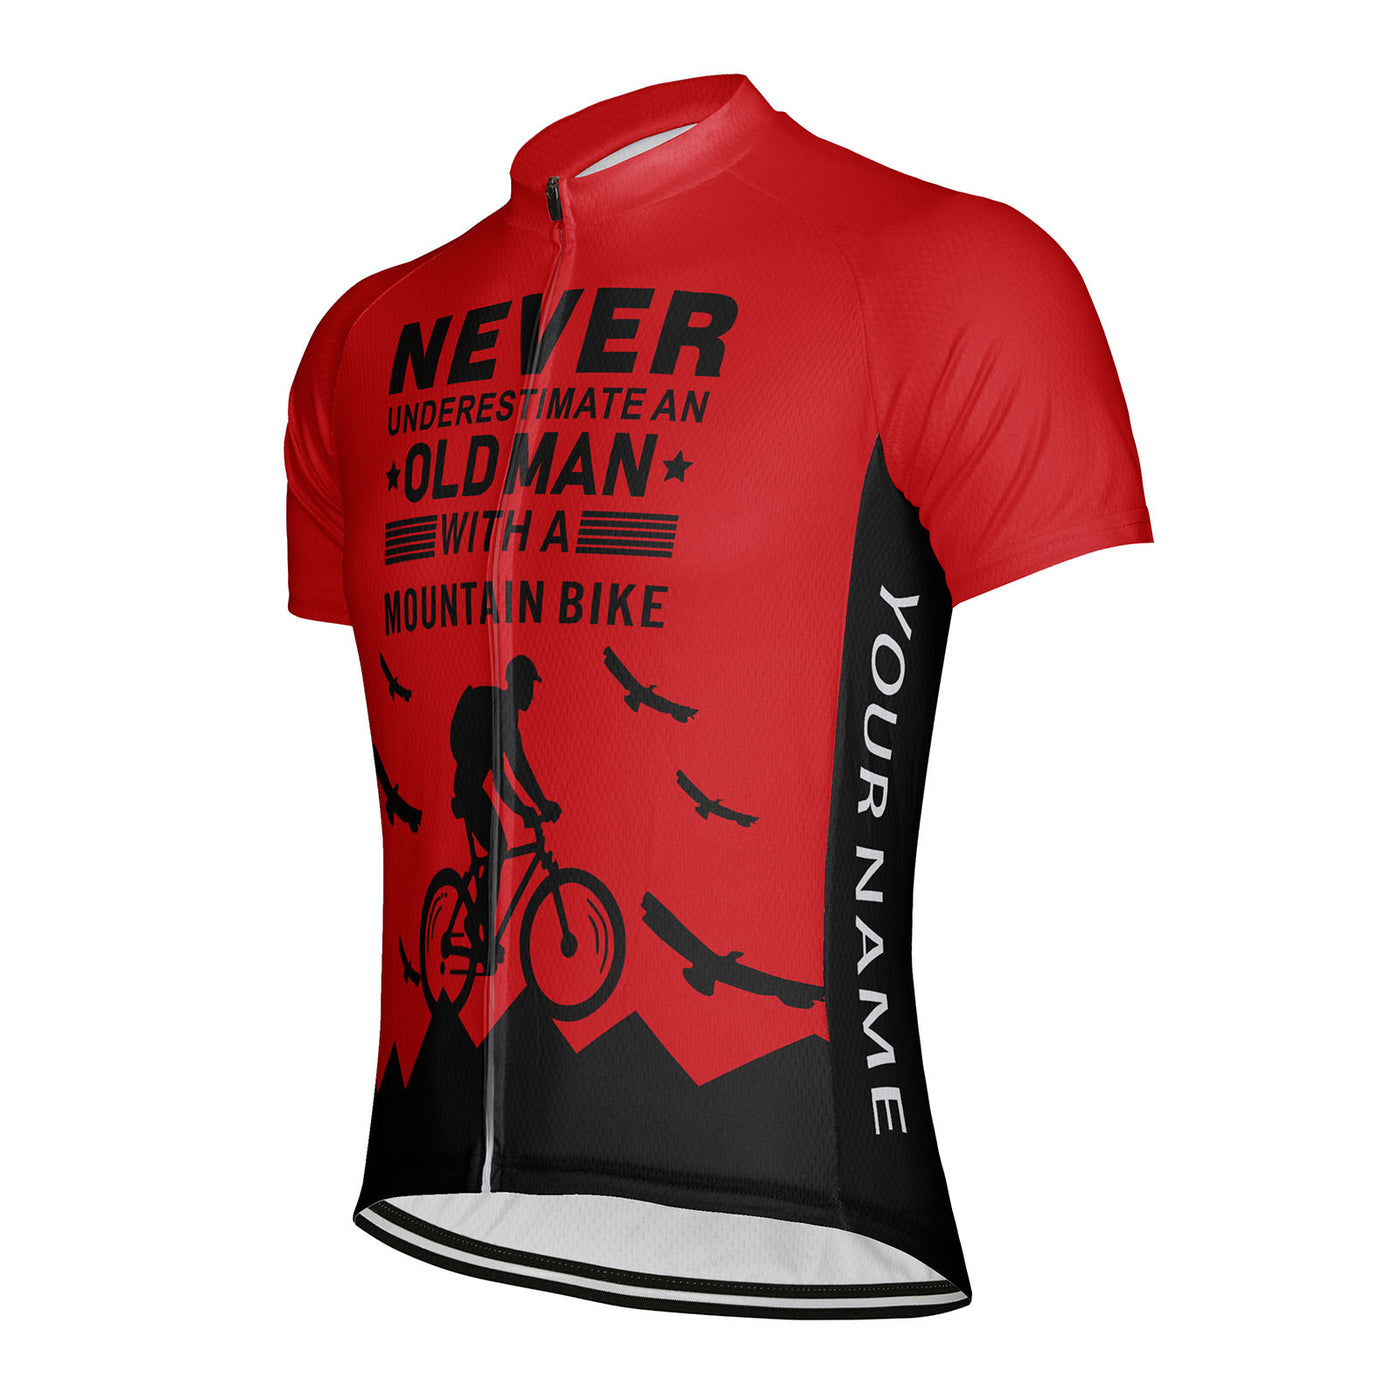 Customized Old Man with A Mountain Bike Men's Cycling Jersey Short Sleeve